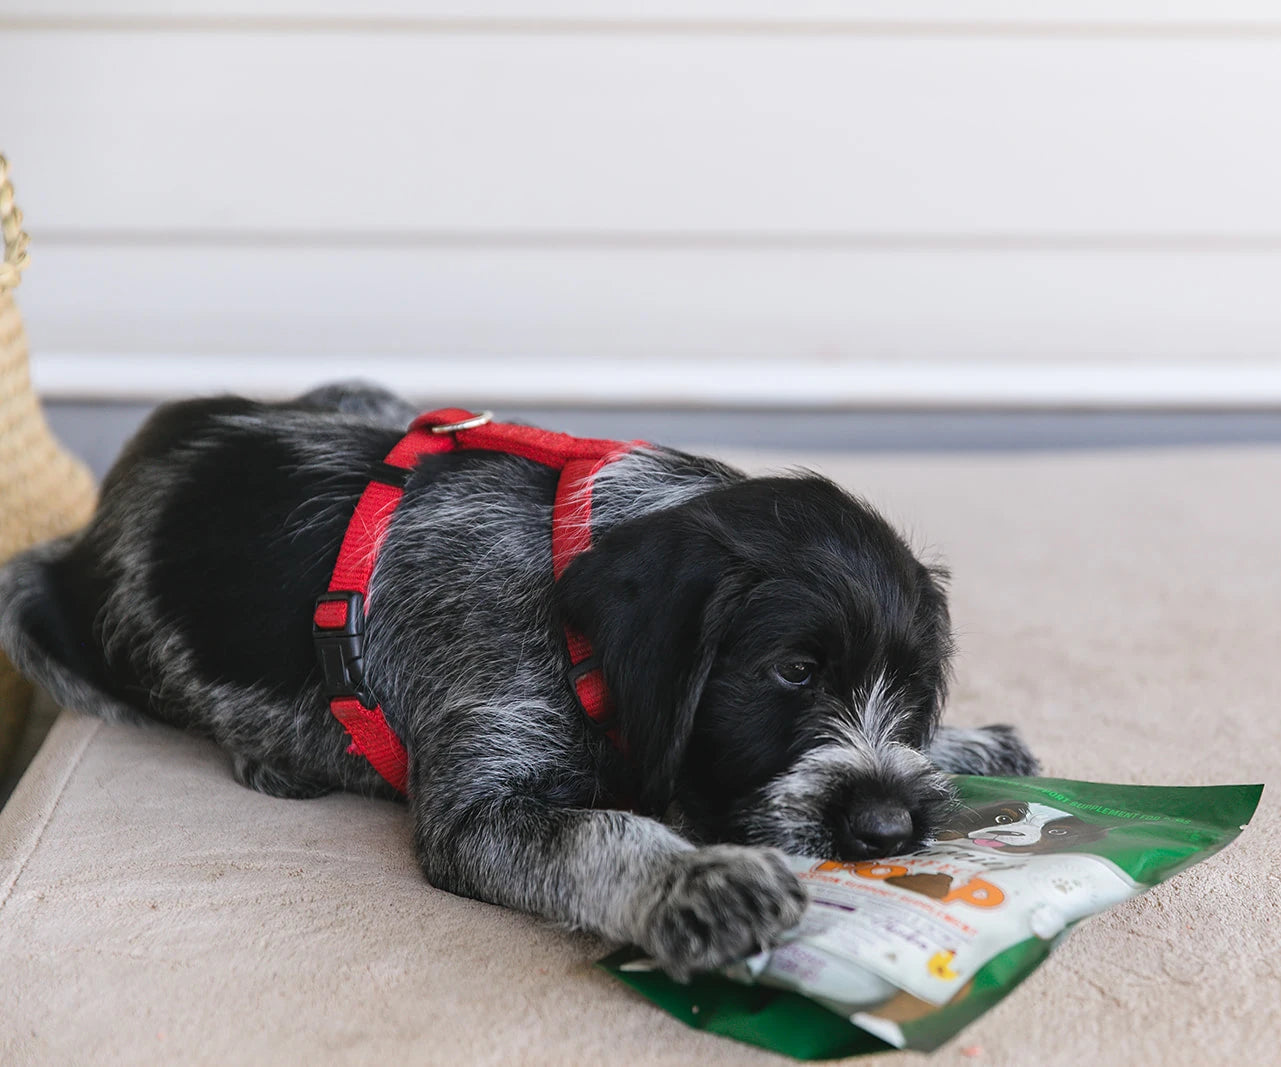 An adorable puppy plays with a bag of Bernie's Perfect Poop